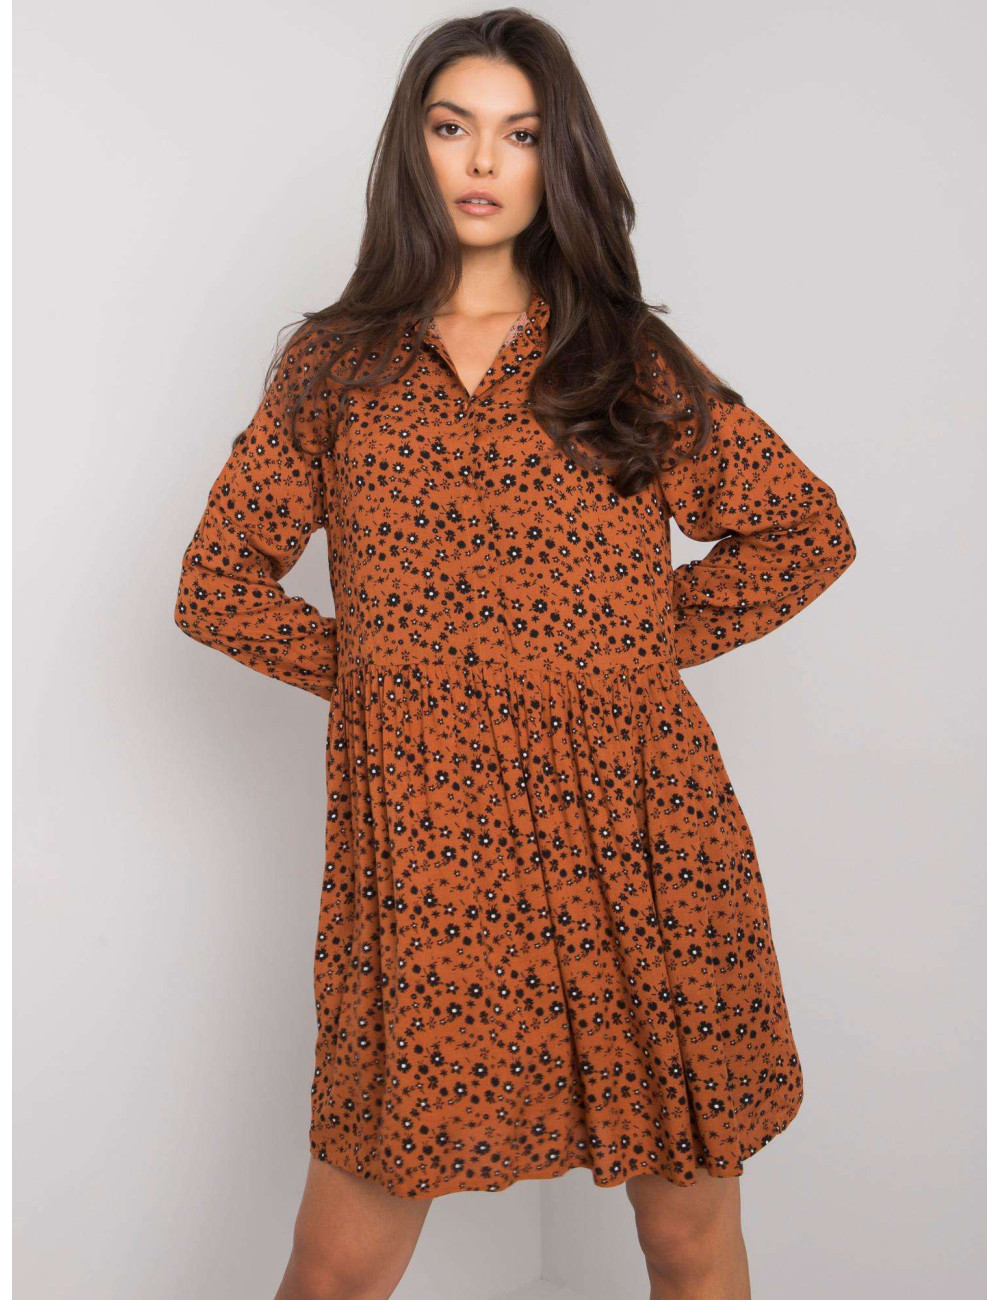 Brown dress with prints Rima FRESH MADE 